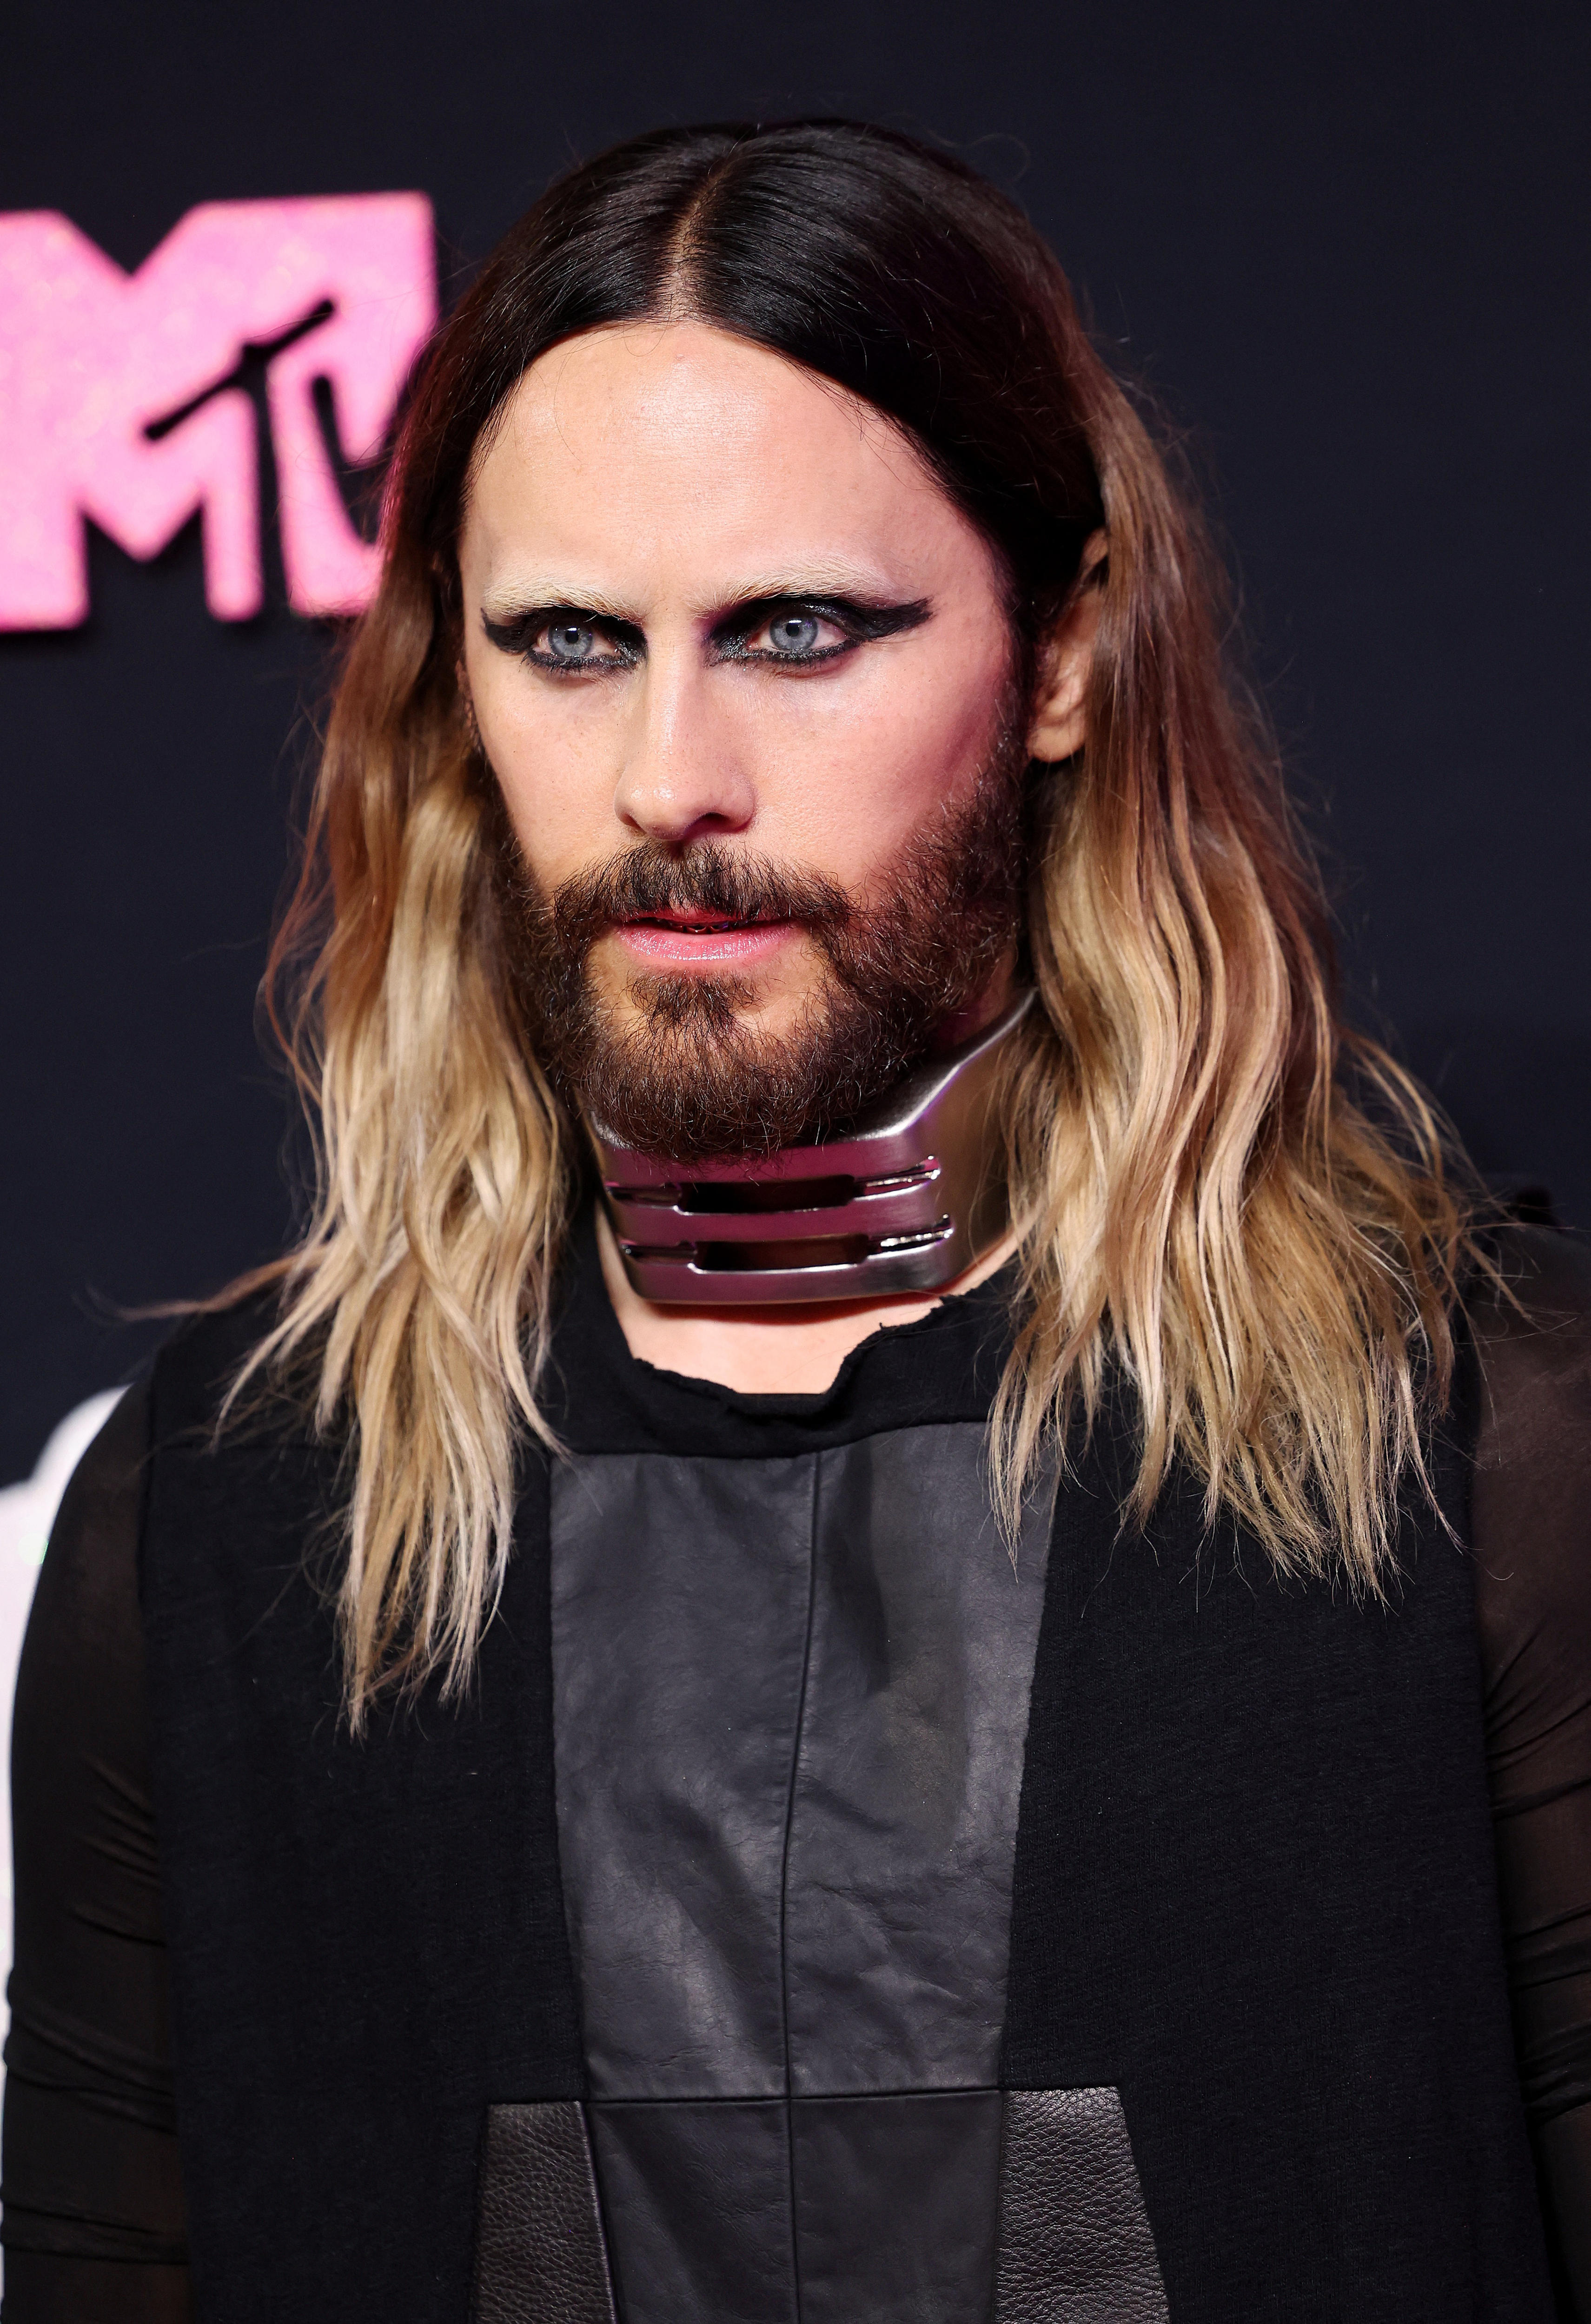 Jared Leto on the red carpet at the VMAs.